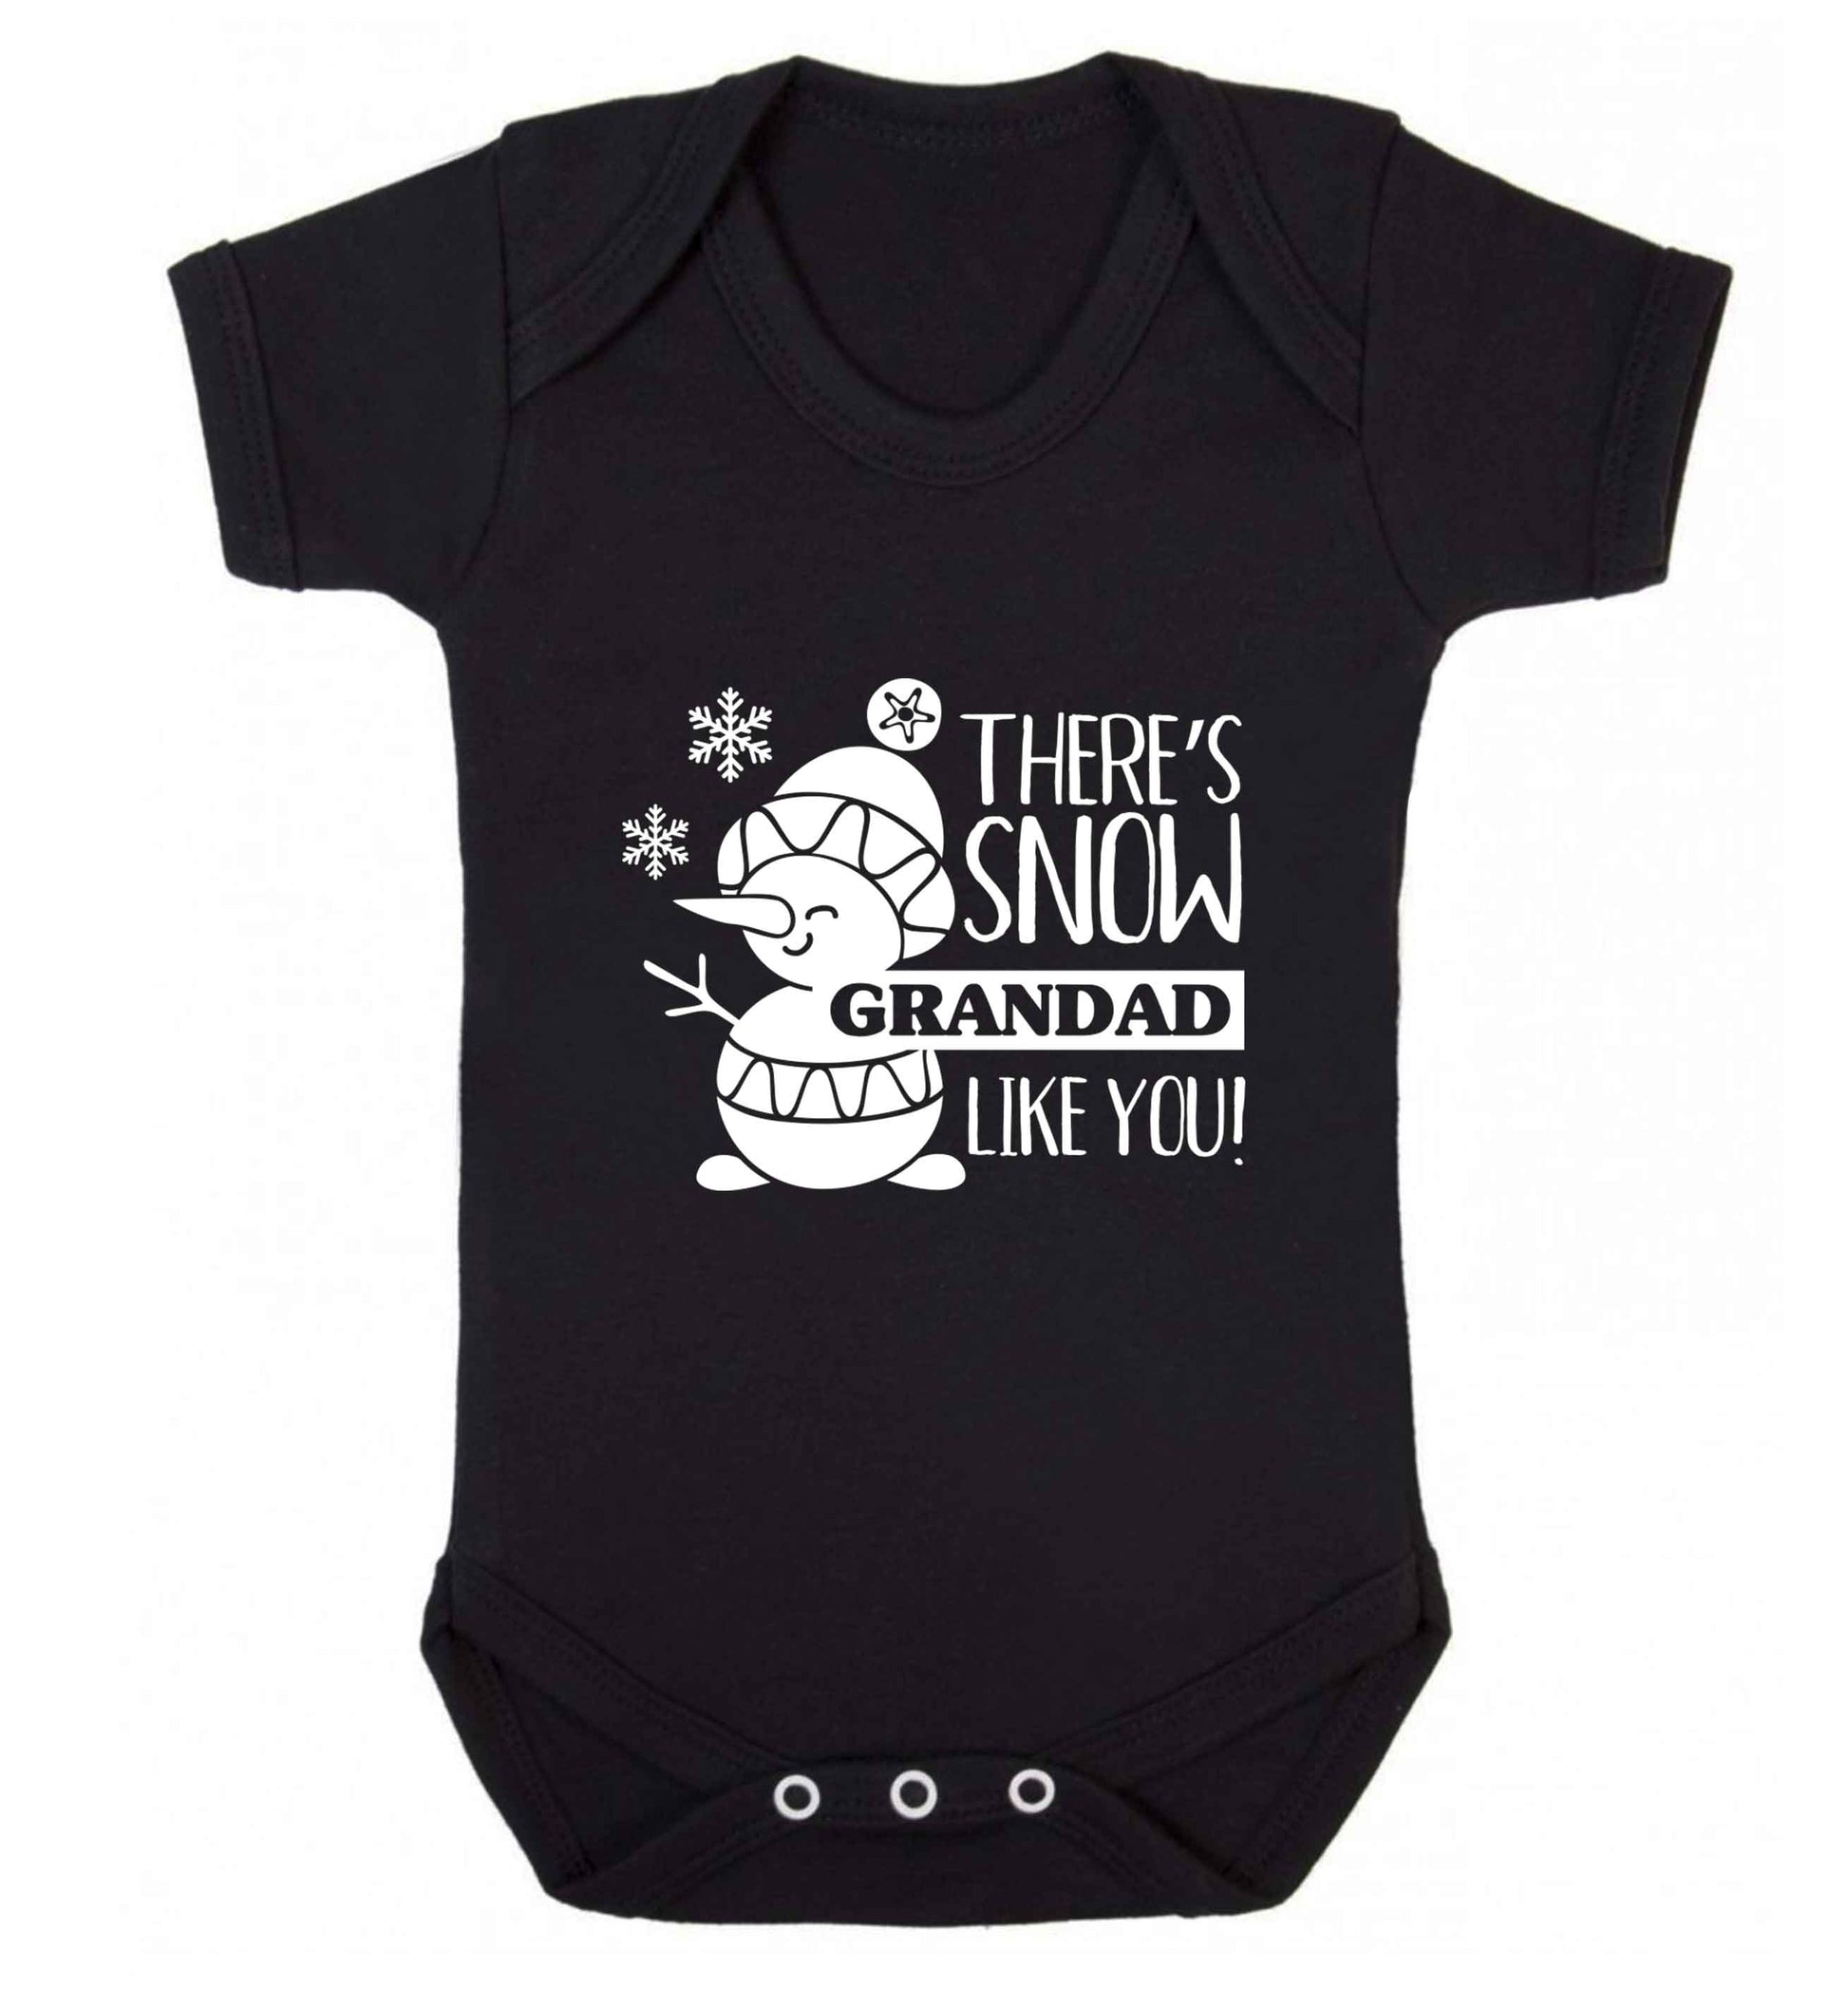 There's snow grandad like you baby vest black 18-24 months